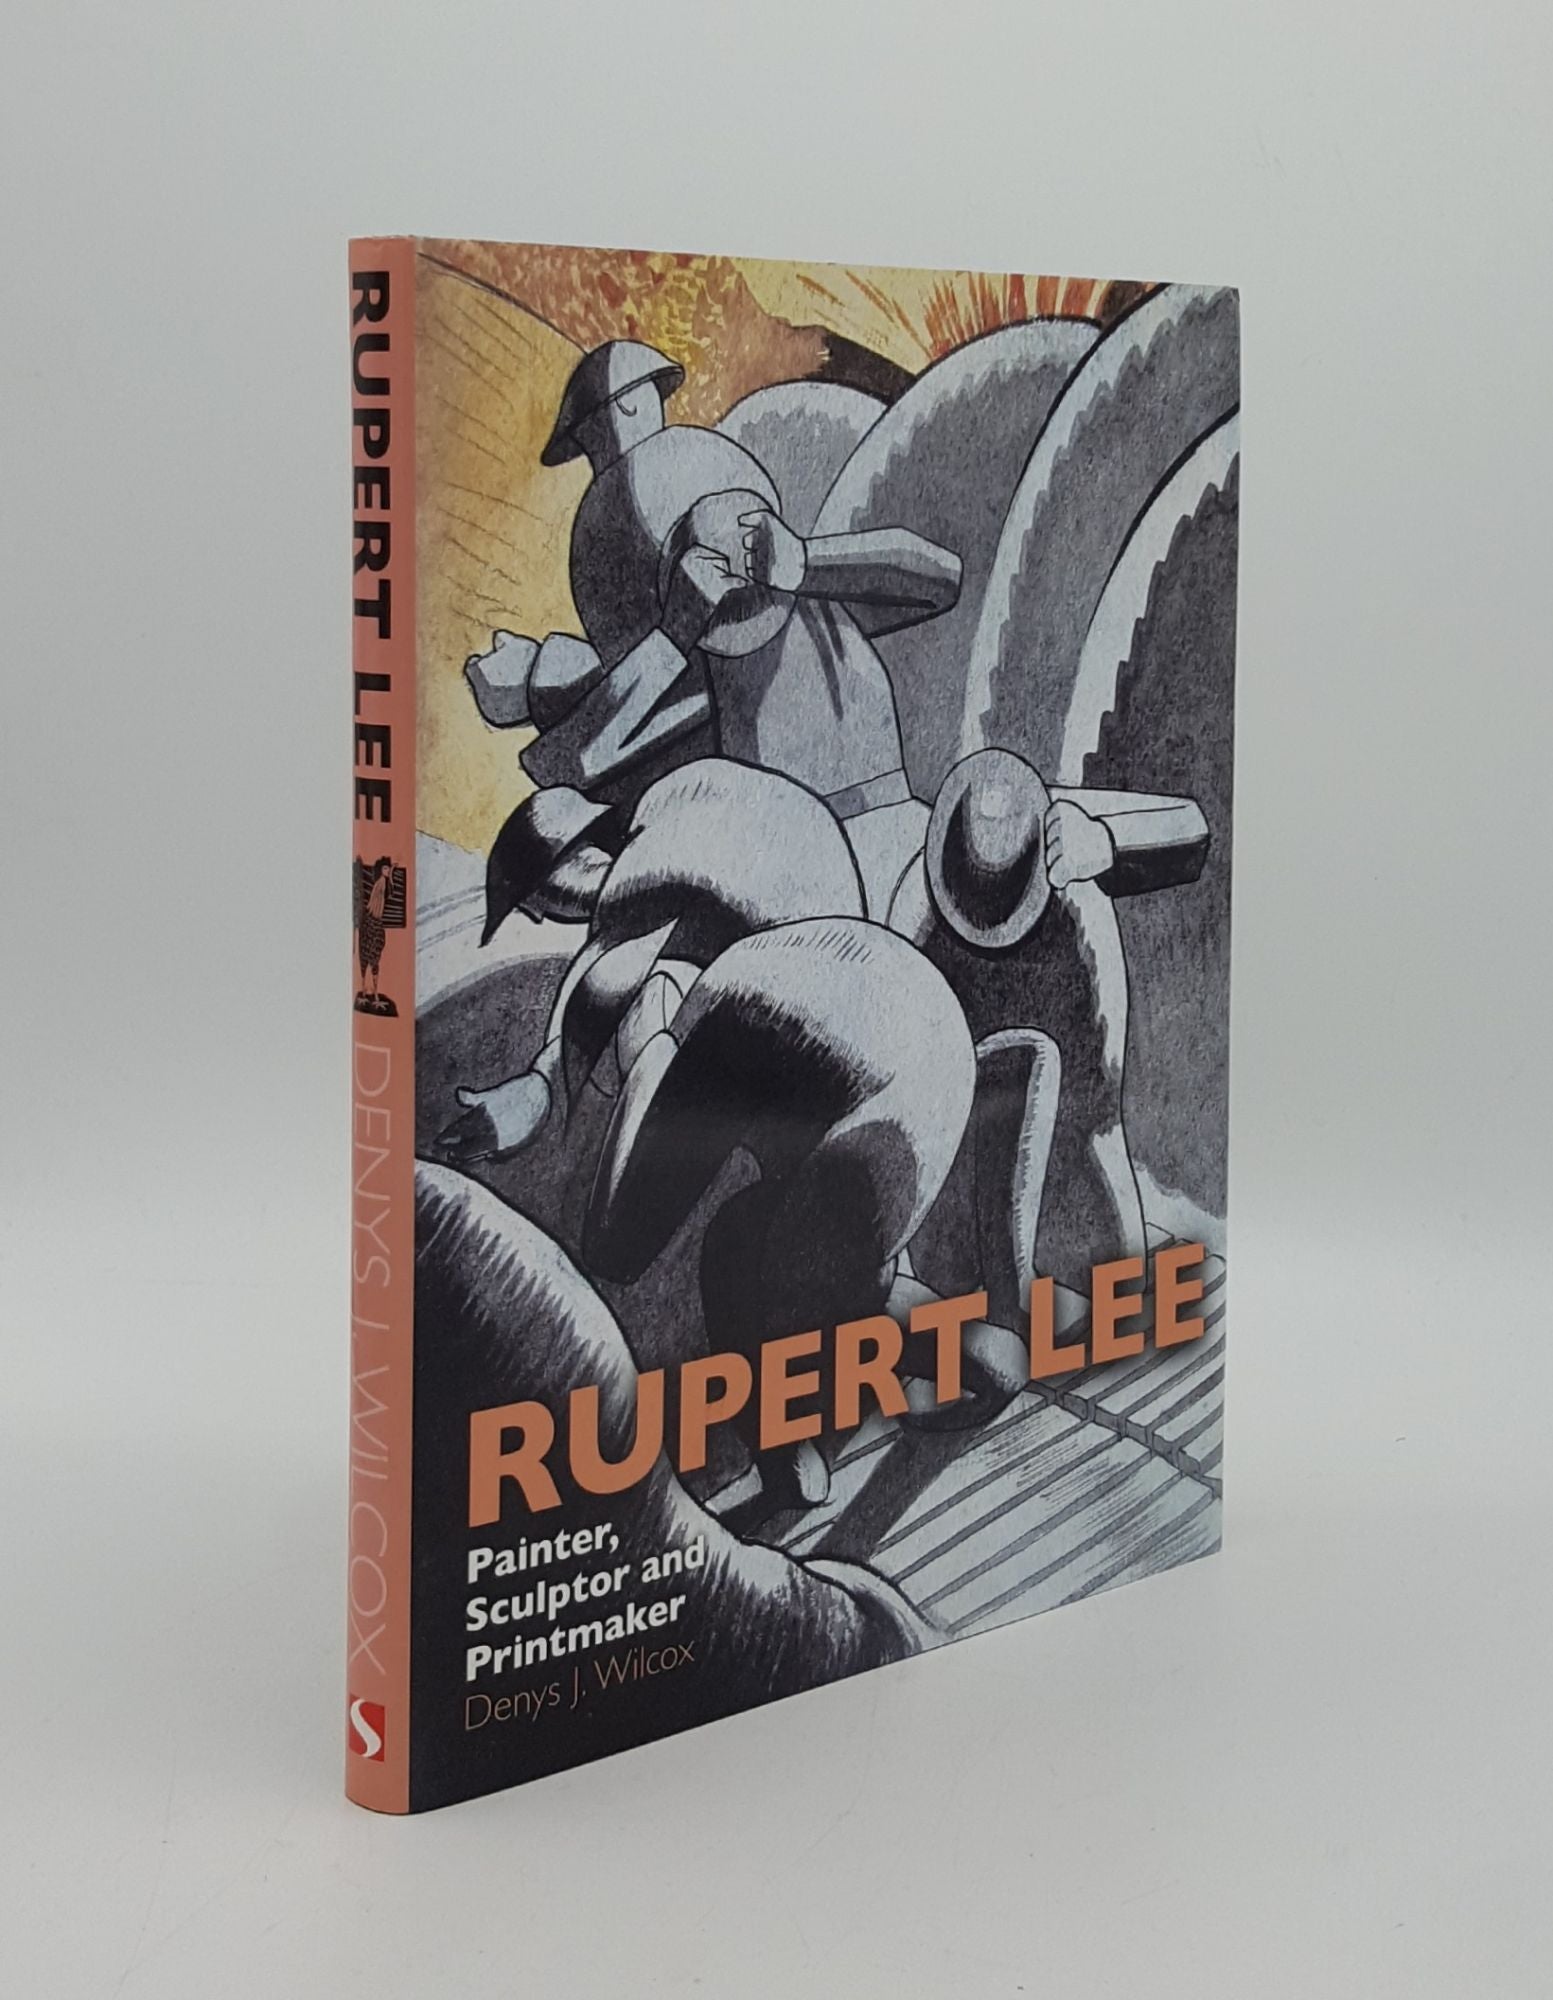 WILCOX Denys J. - Rupert Lee Painter Sculptor and Printmaker with a Catalogue Raisonne of the Graphic Work